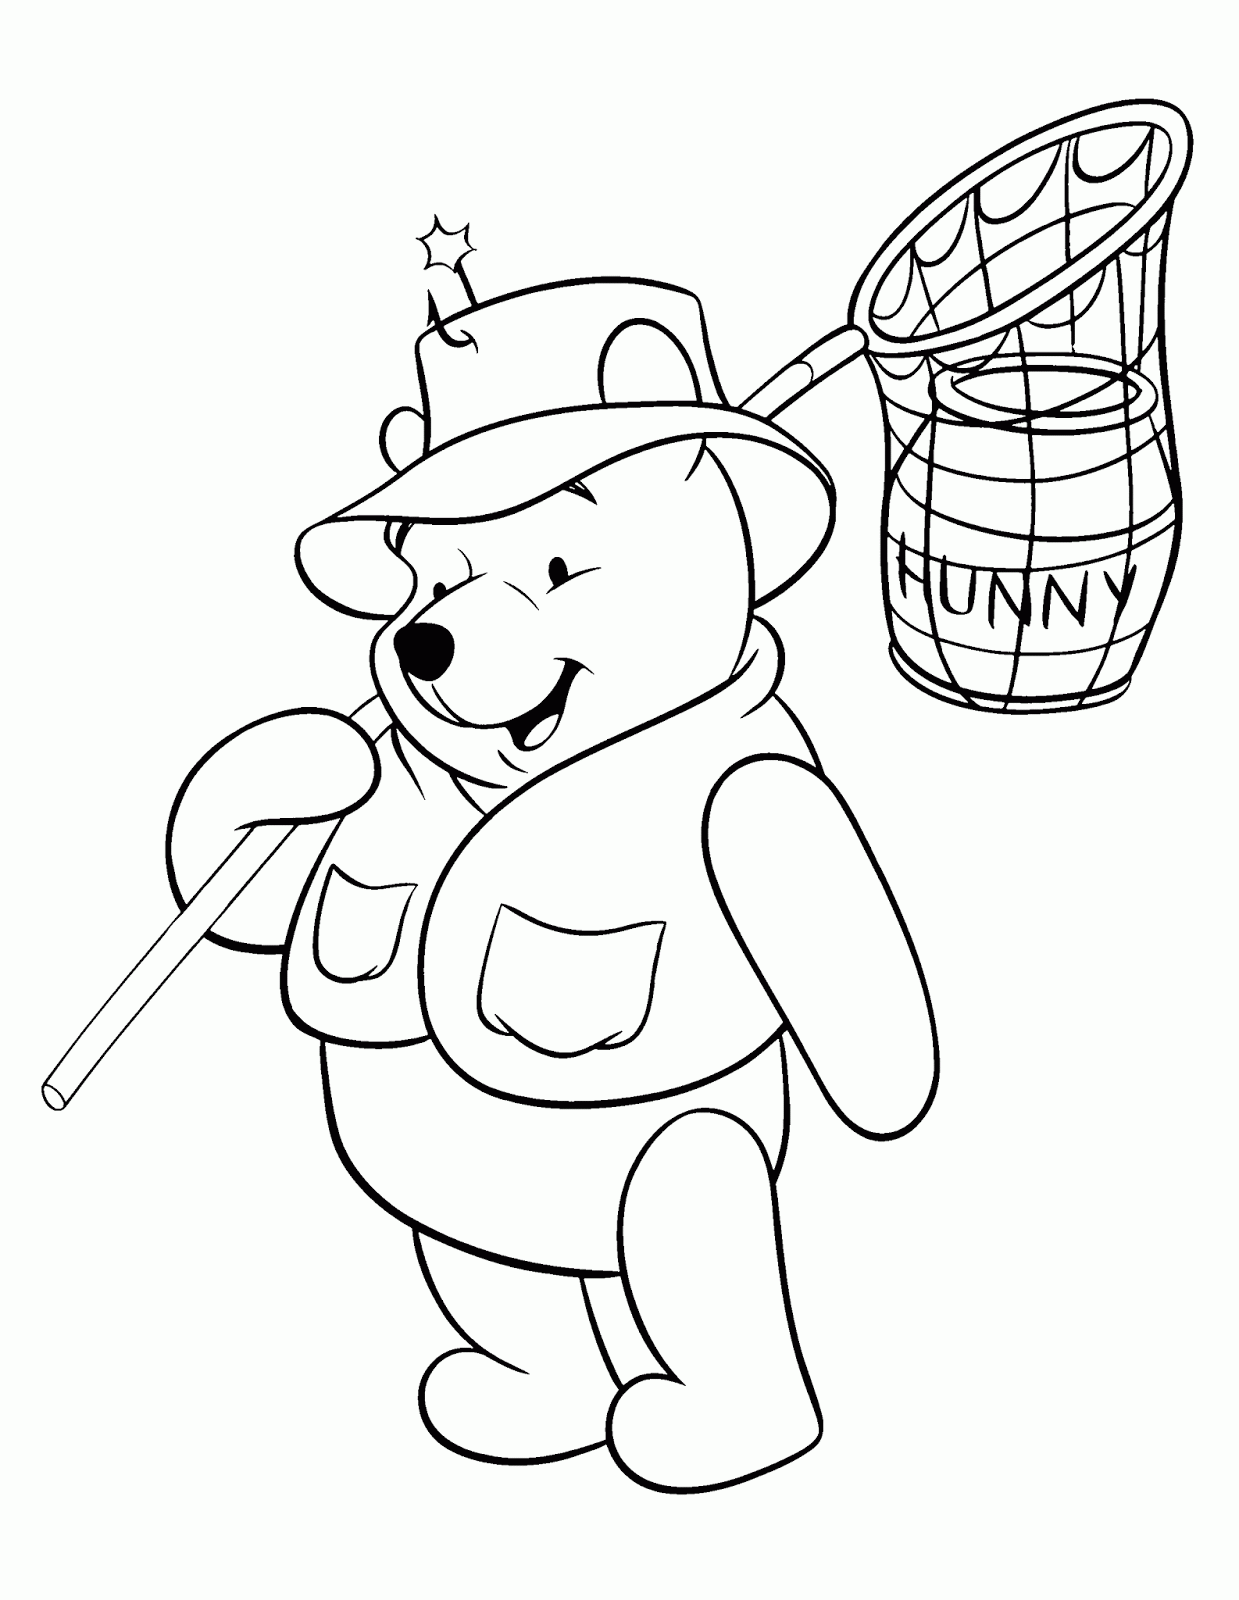 winnie pooh colouring pages coloring pages winnie the pooh and friends free printable winnie pages colouring pooh 